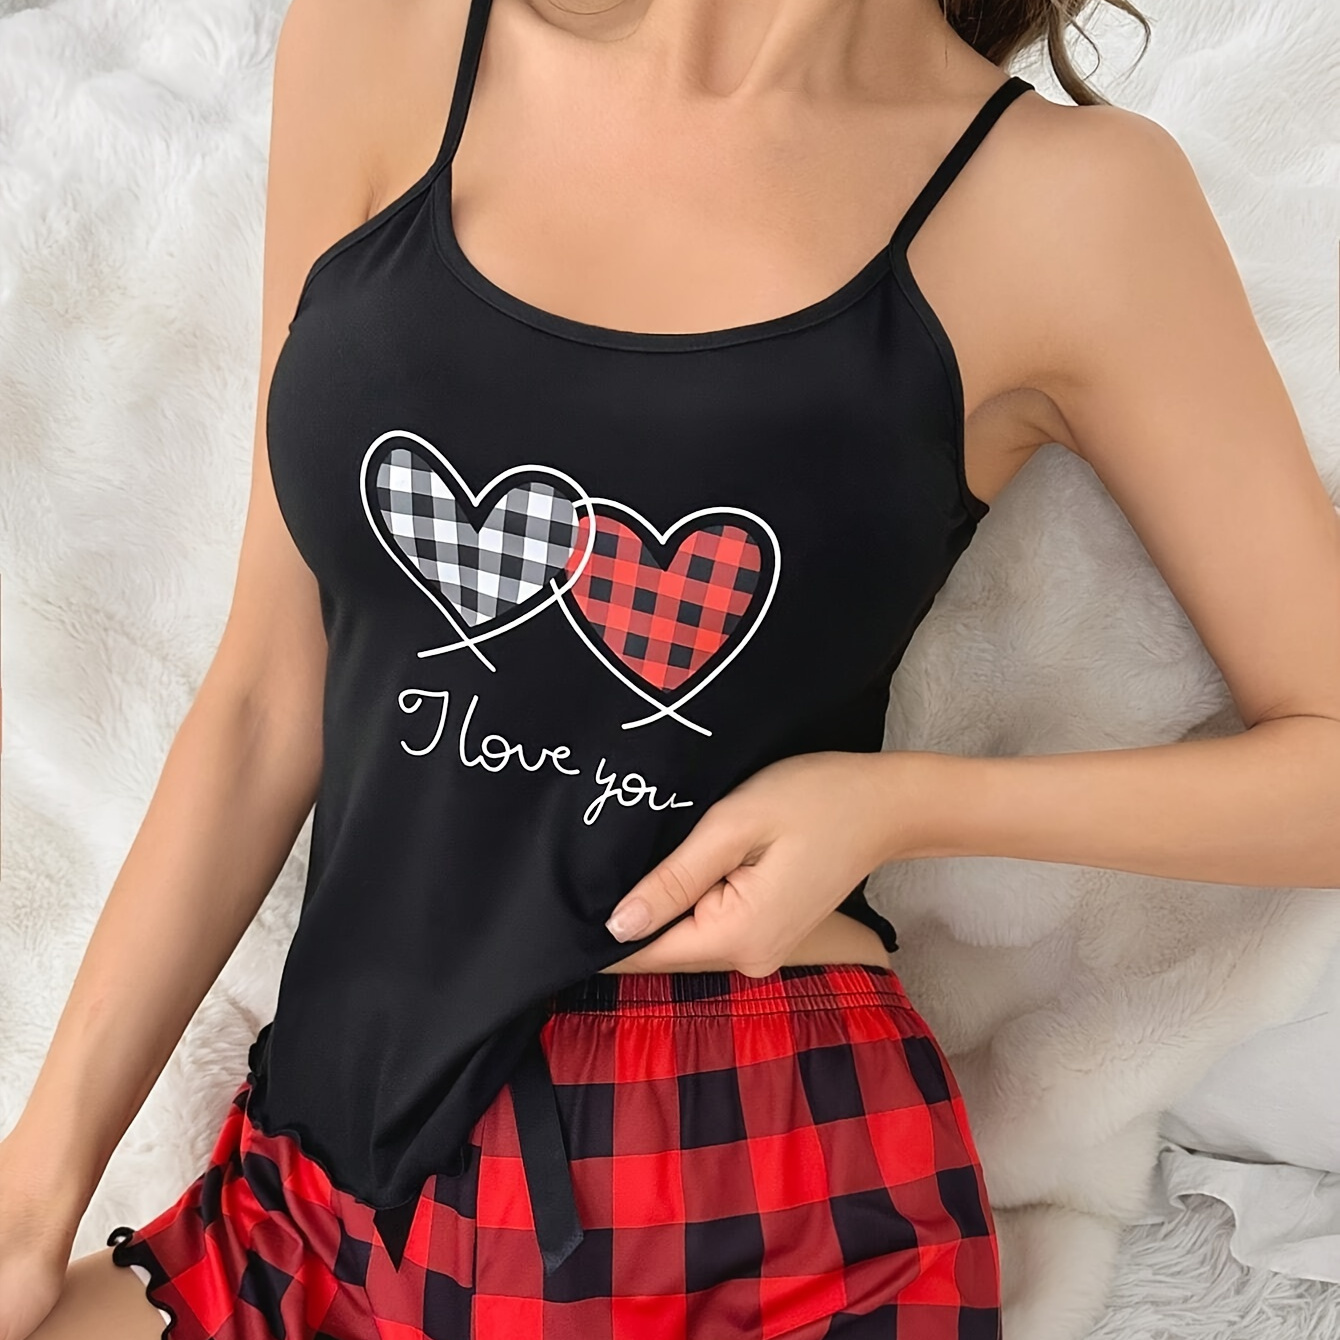 

Women's Plaid Heart & Slogan Print Frill Trim Casual Pajama Set, Round Neck Backless Cami Top & Shorts, Comfortable Relaxed Fit, Summer Nightwear